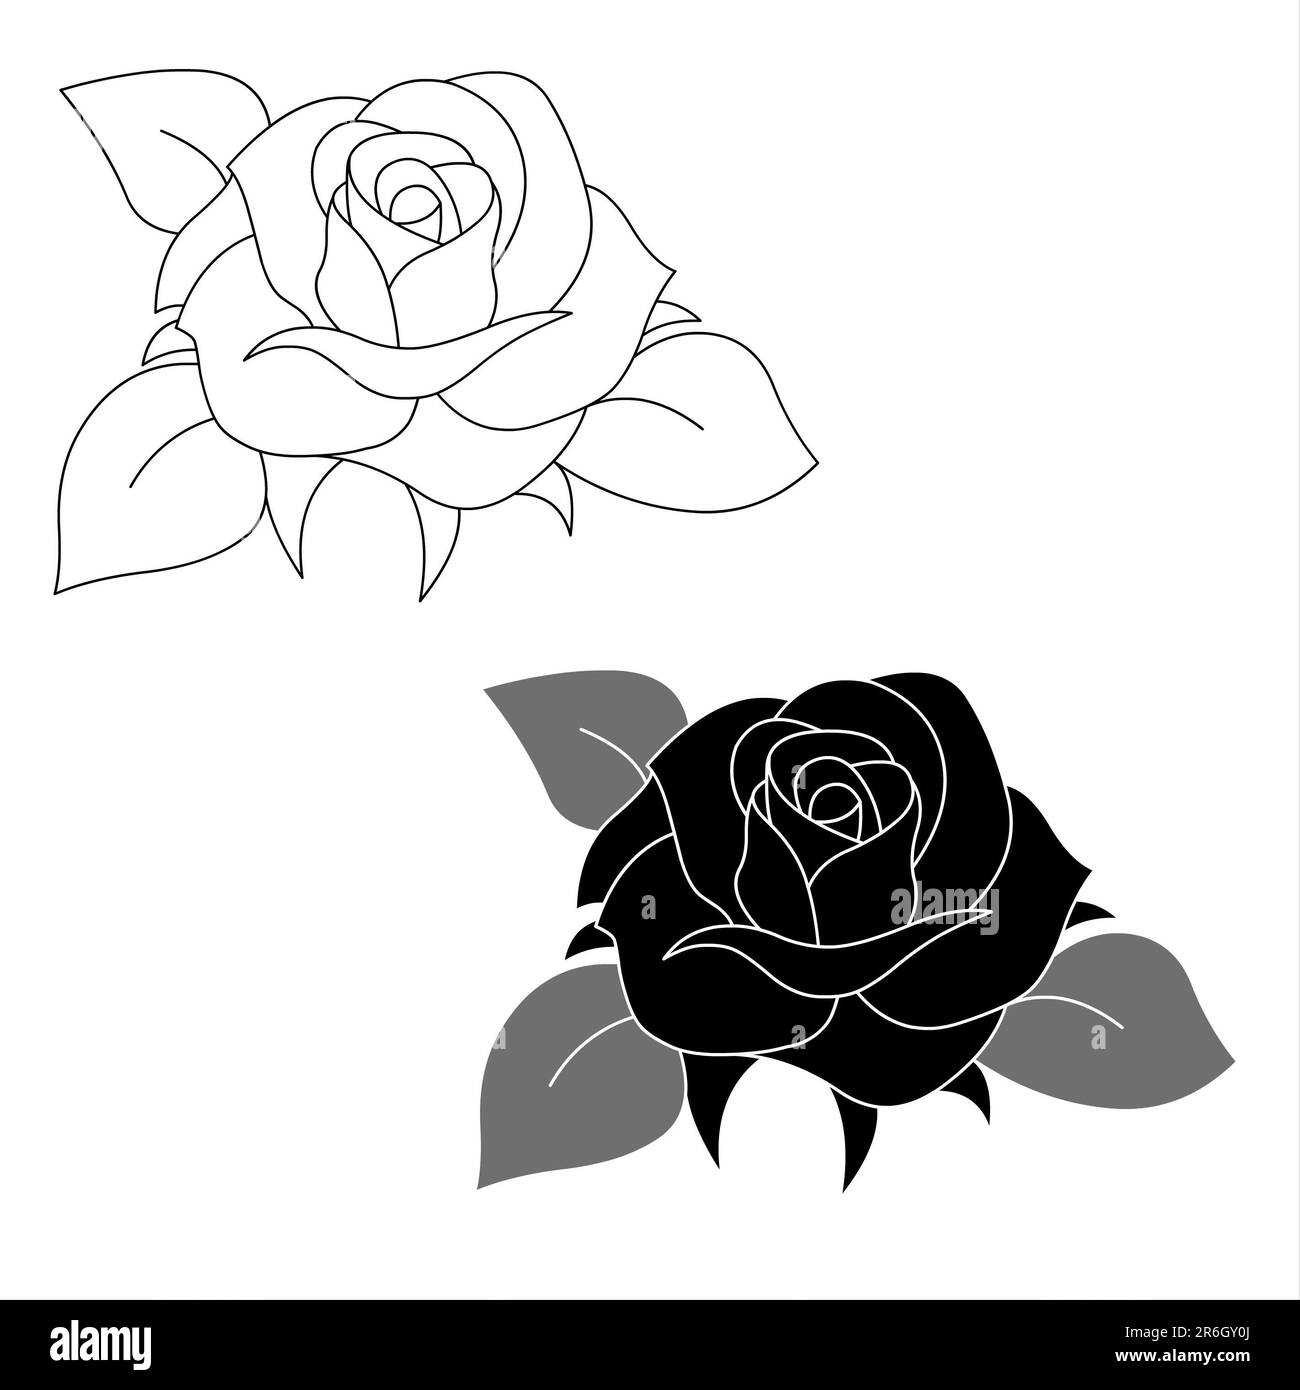 Black and white roses isolated on a white background Stock Photo